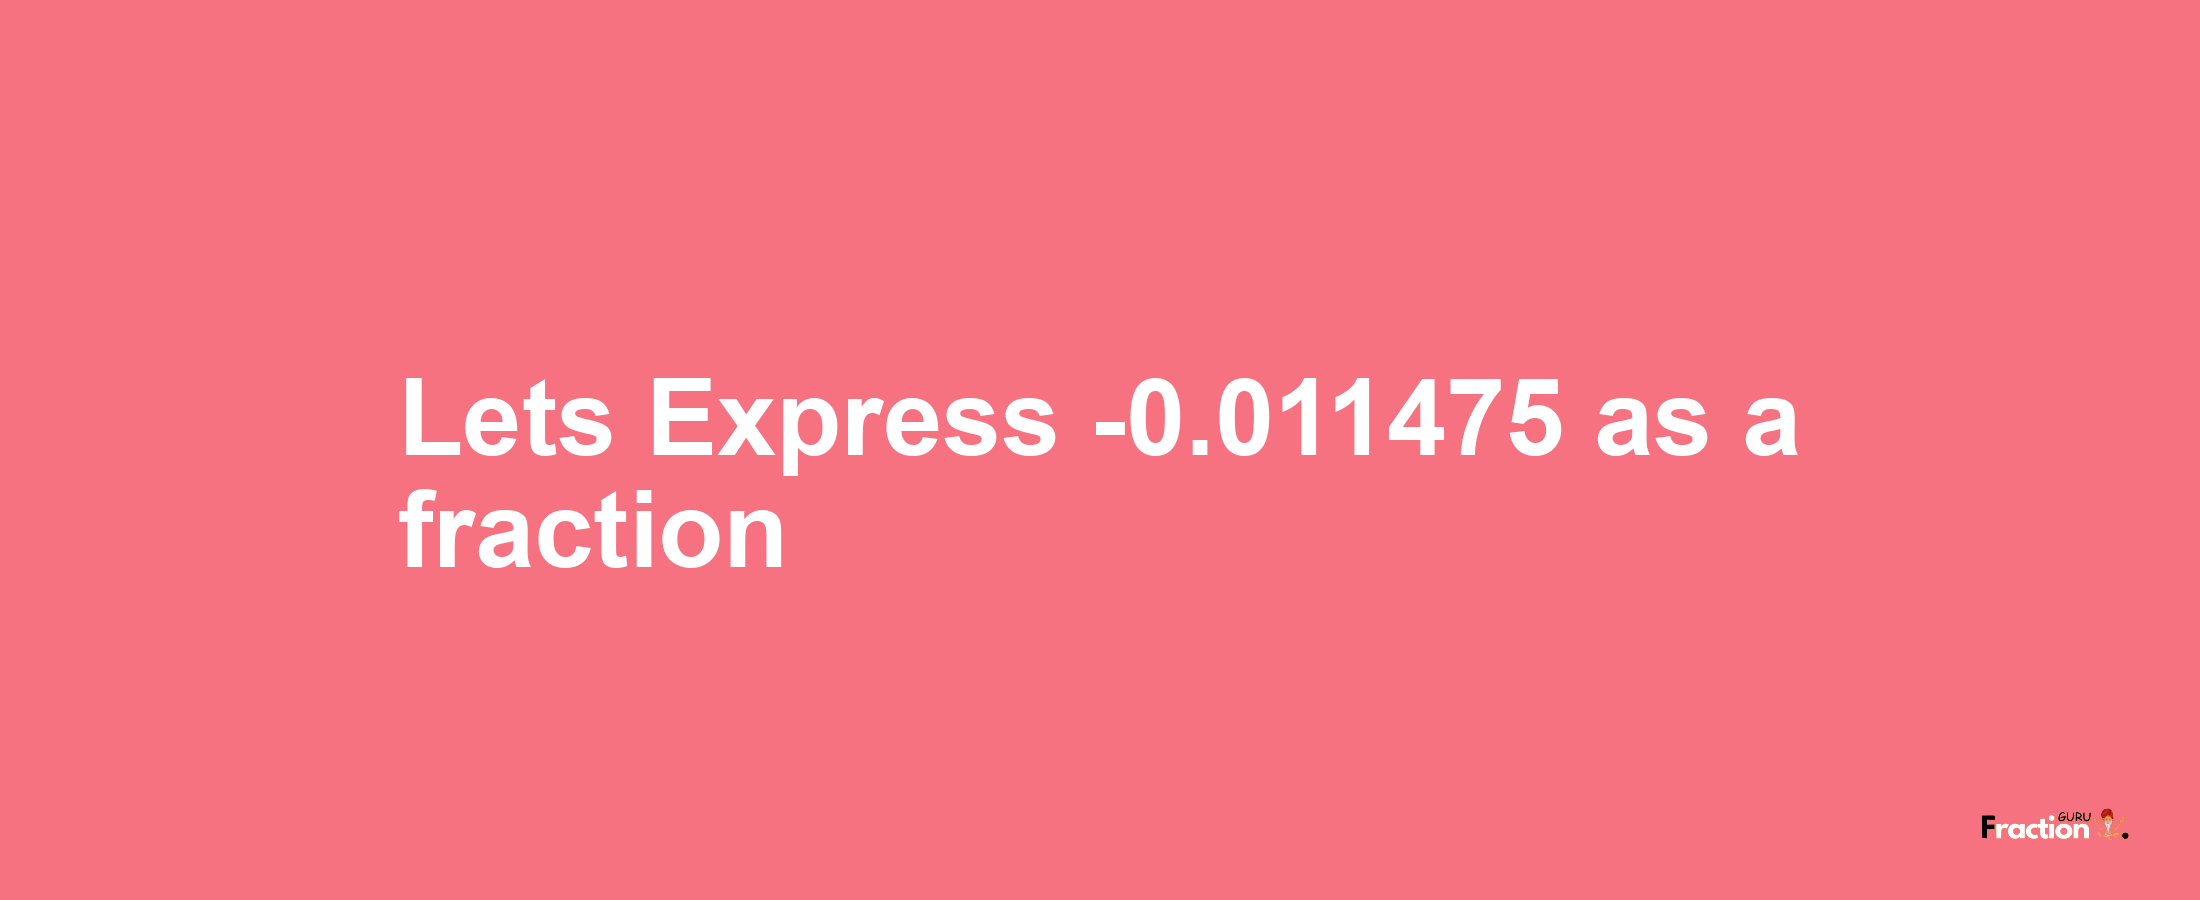 Lets Express -0.011475 as afraction